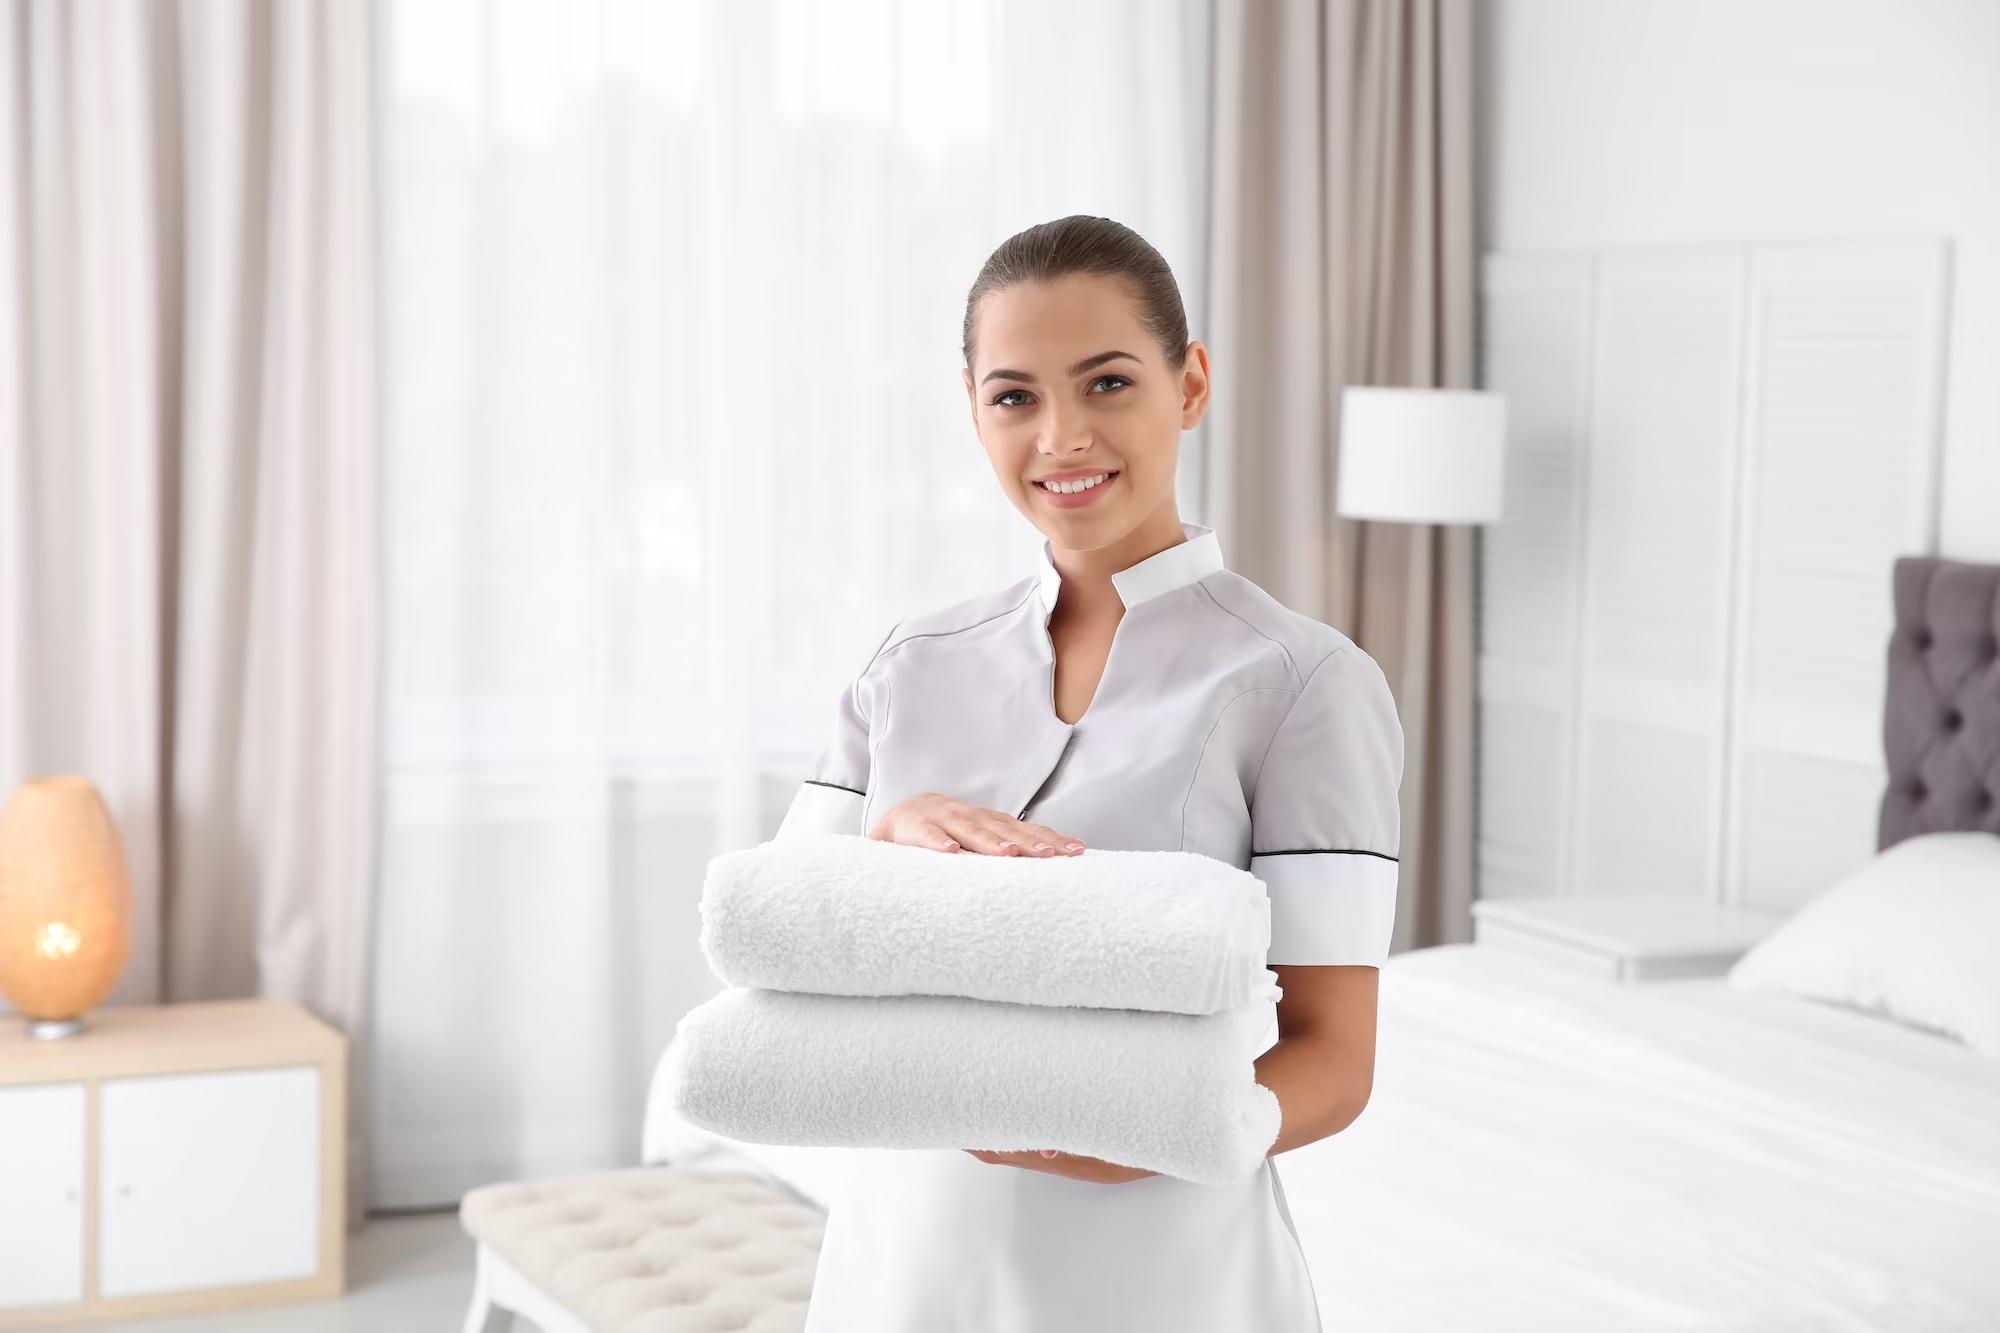 hotel housekeeping staff in hotel room holding neatly folded towels and looking happy